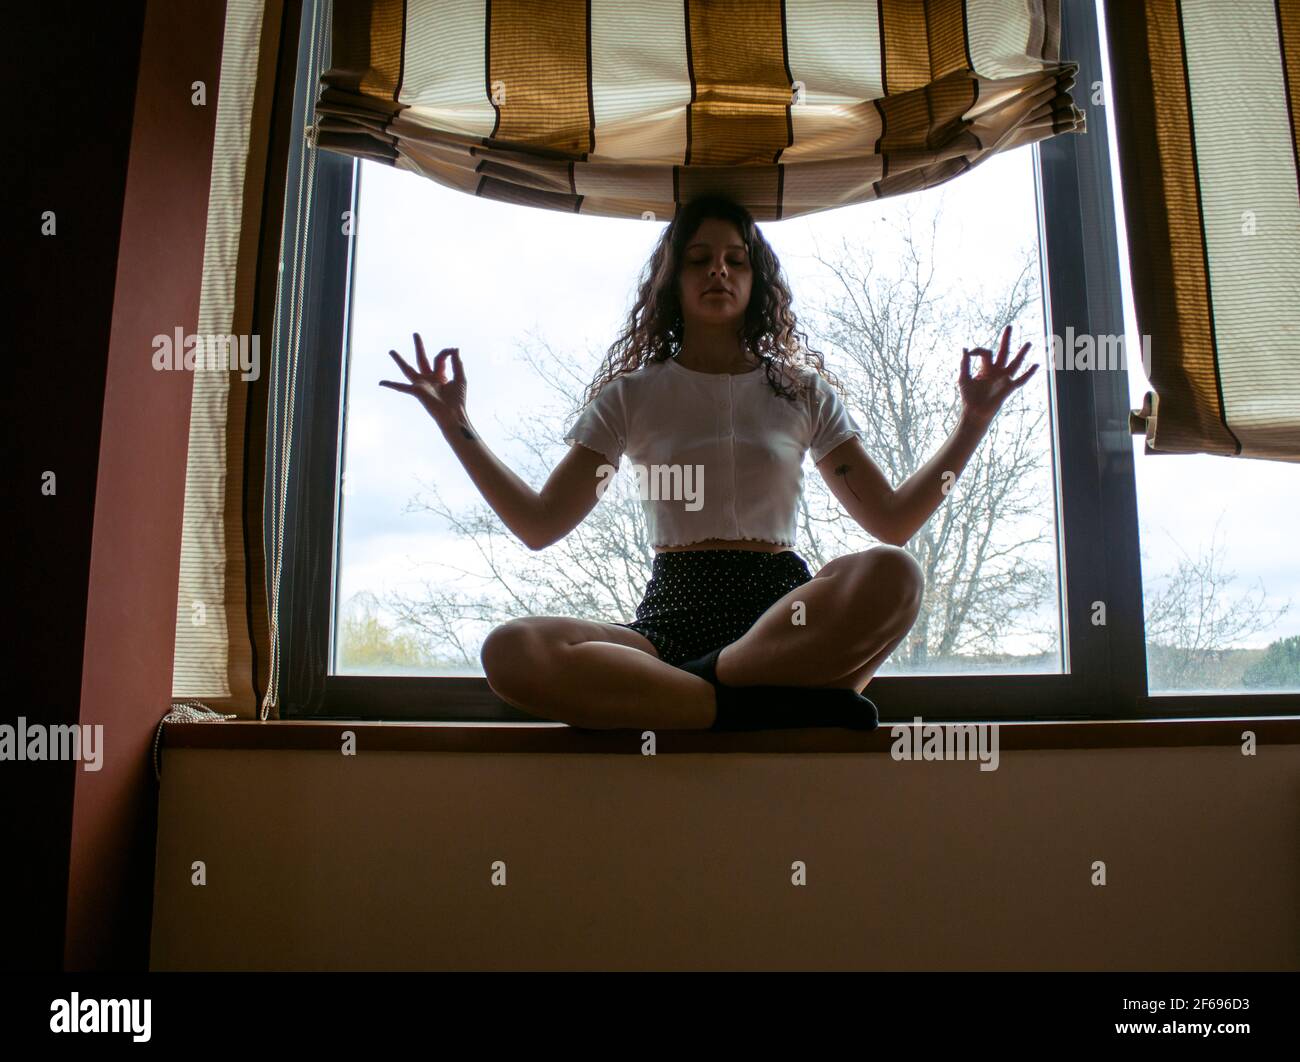 young woman sitting on a window looking out into backlight doing yoga Stock Photo